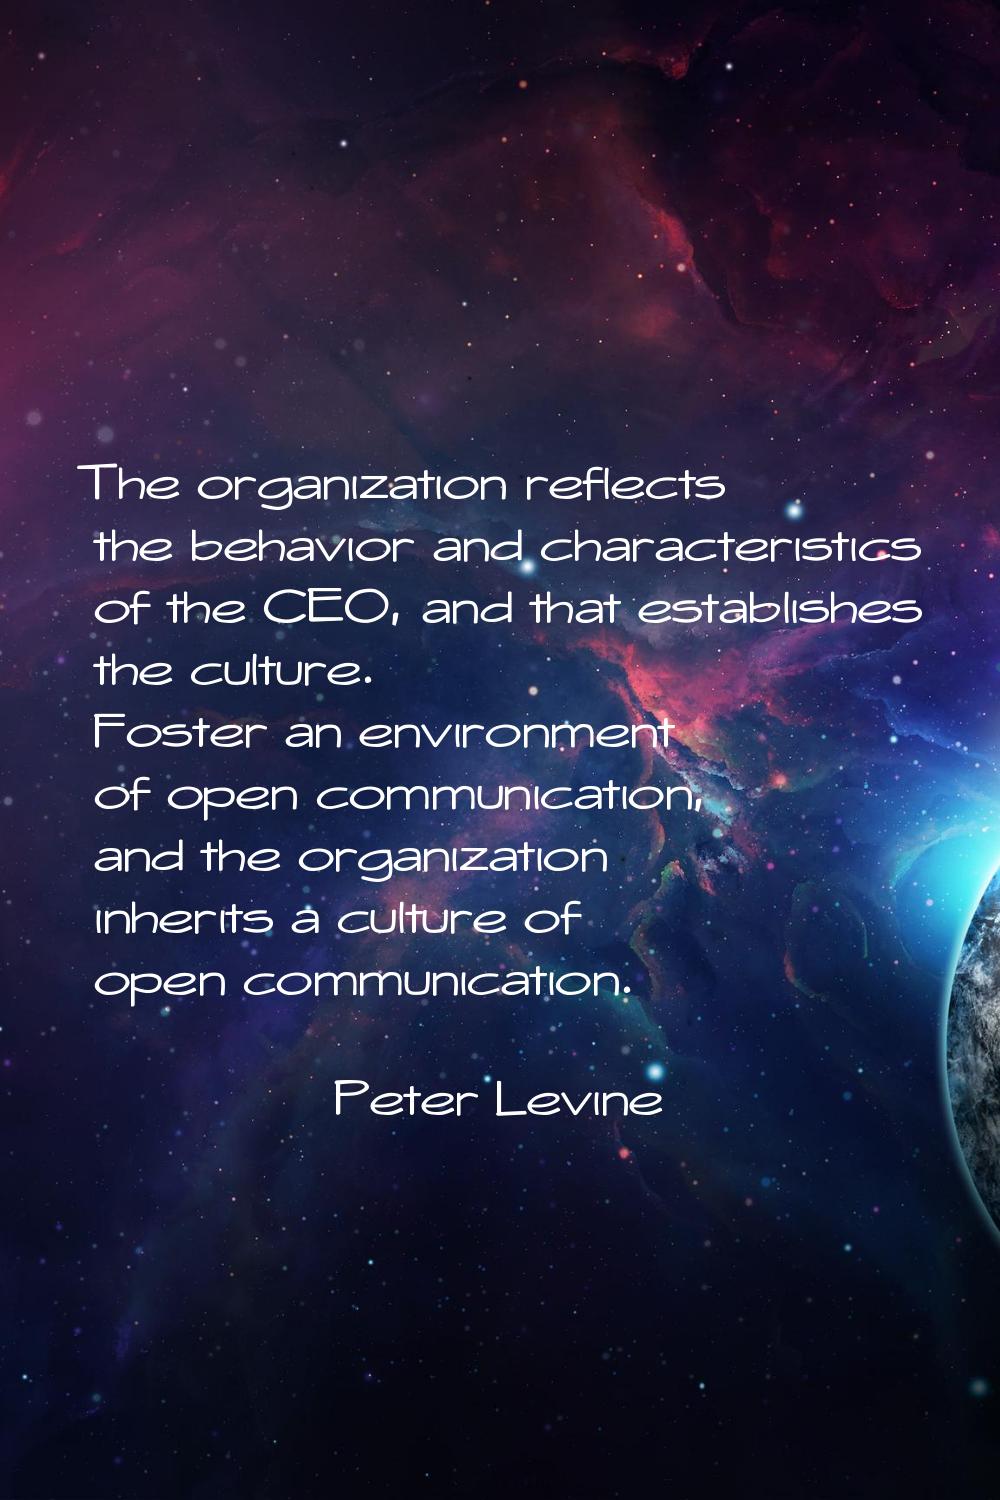 The organization reflects the behavior and characteristics of the CEO, and that establishes the cul